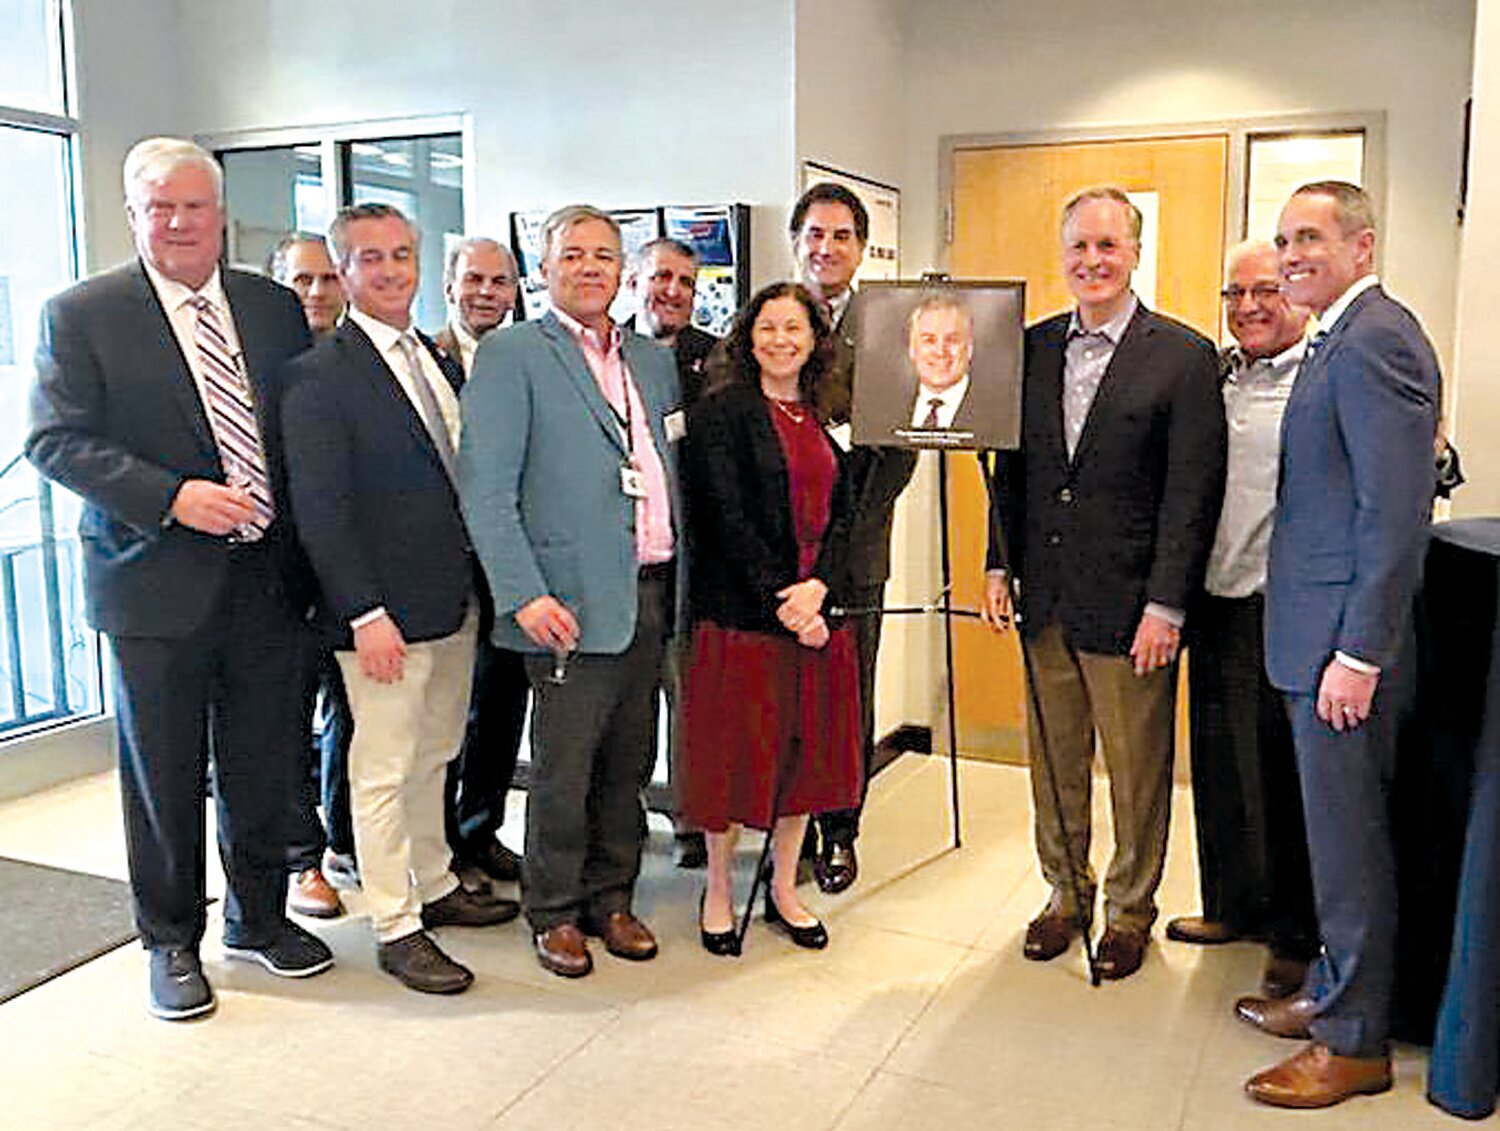 At the PA Biotechnology Center’s unveiling of a portrait of Mark Schweiker, the former Pa. governor stands with former U.S. Rep. Jim Greenwood, Pa. Sen. Steve Santarsiero and other local officials who attended Schweiker’s induction into the center’s Public Service Wall of Fame.